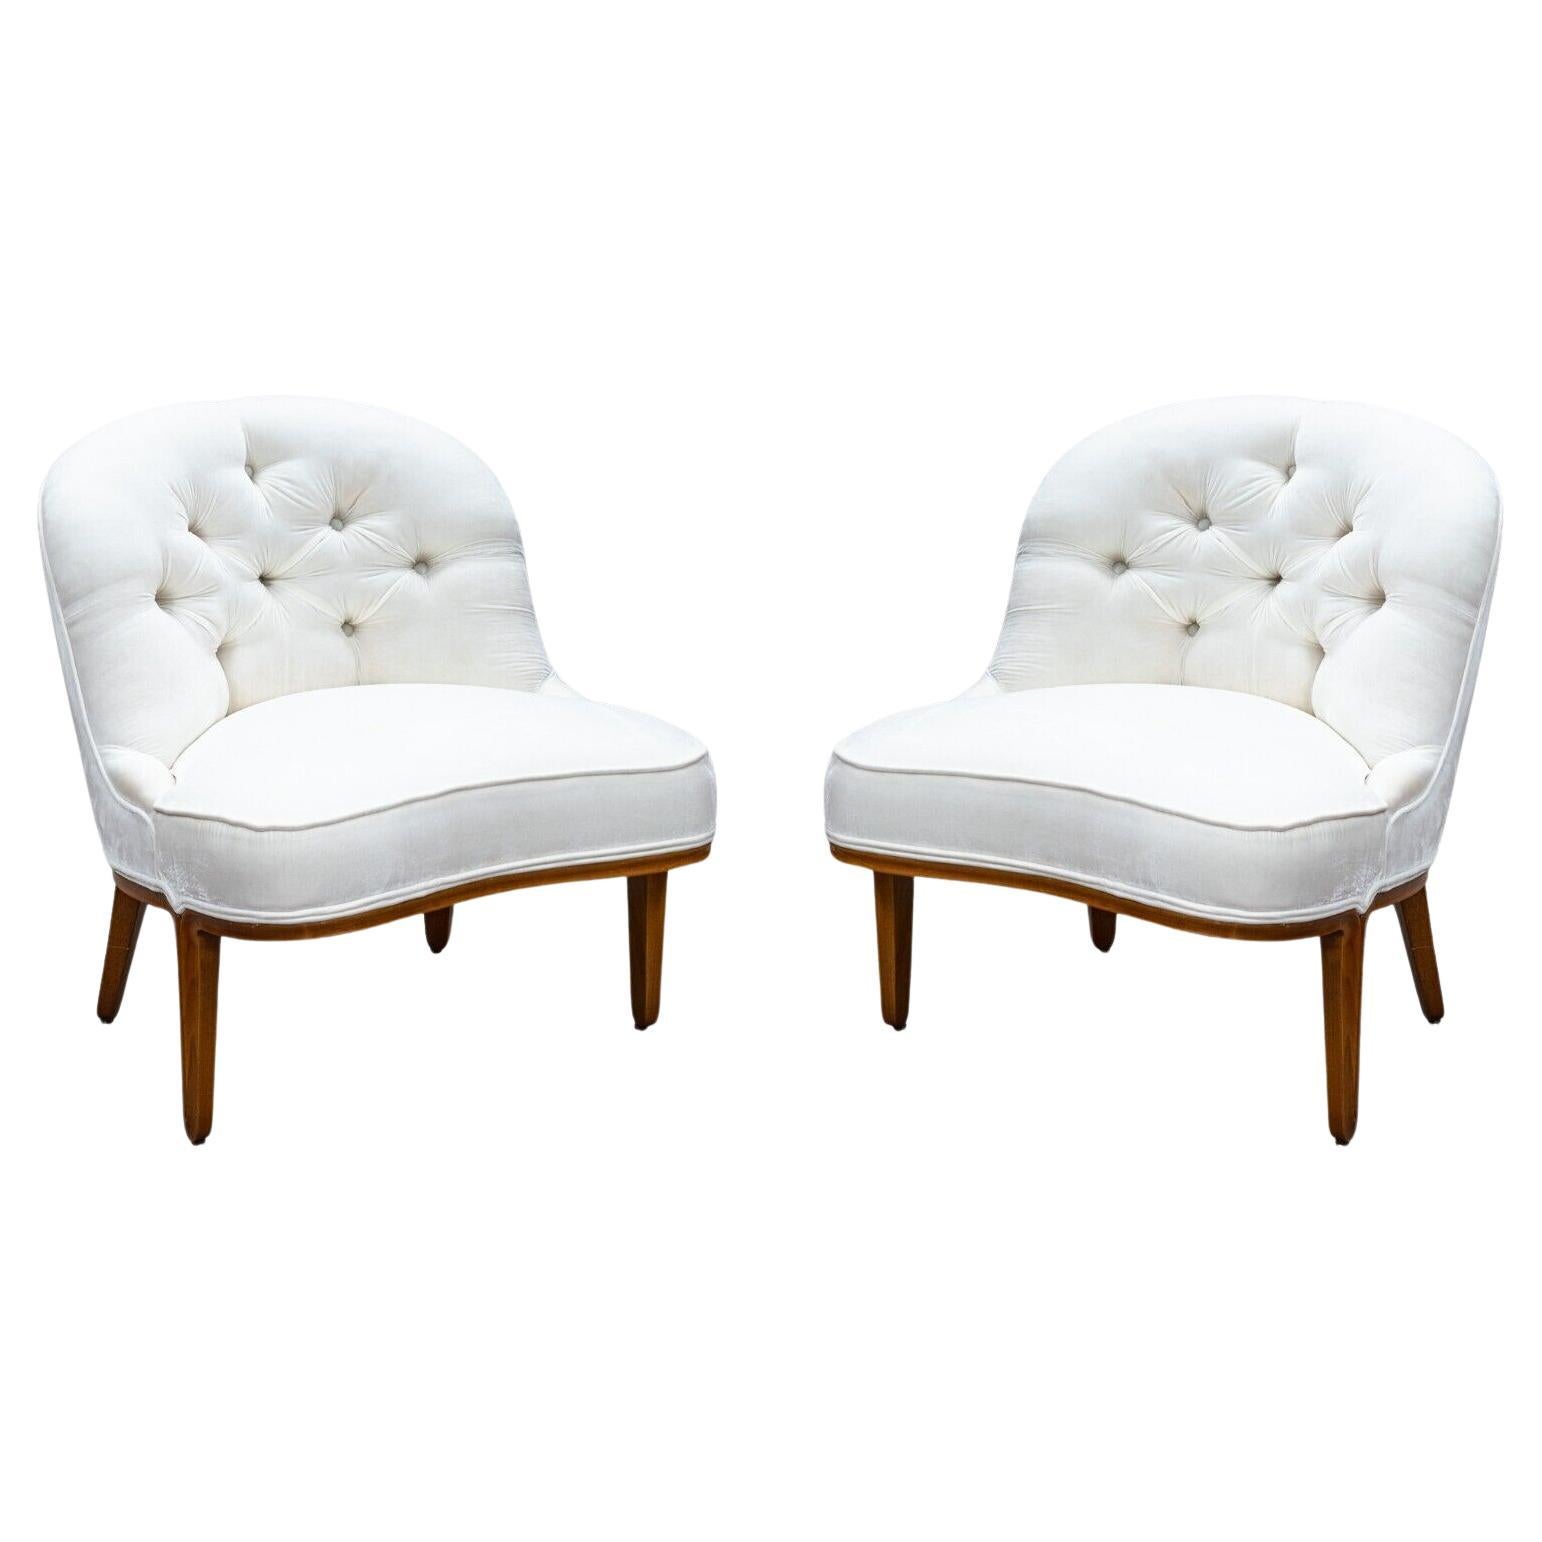 Pair of Edward Wormley for Dunbar Mid Century White Tufted Janus Slipper Chairs For Sale